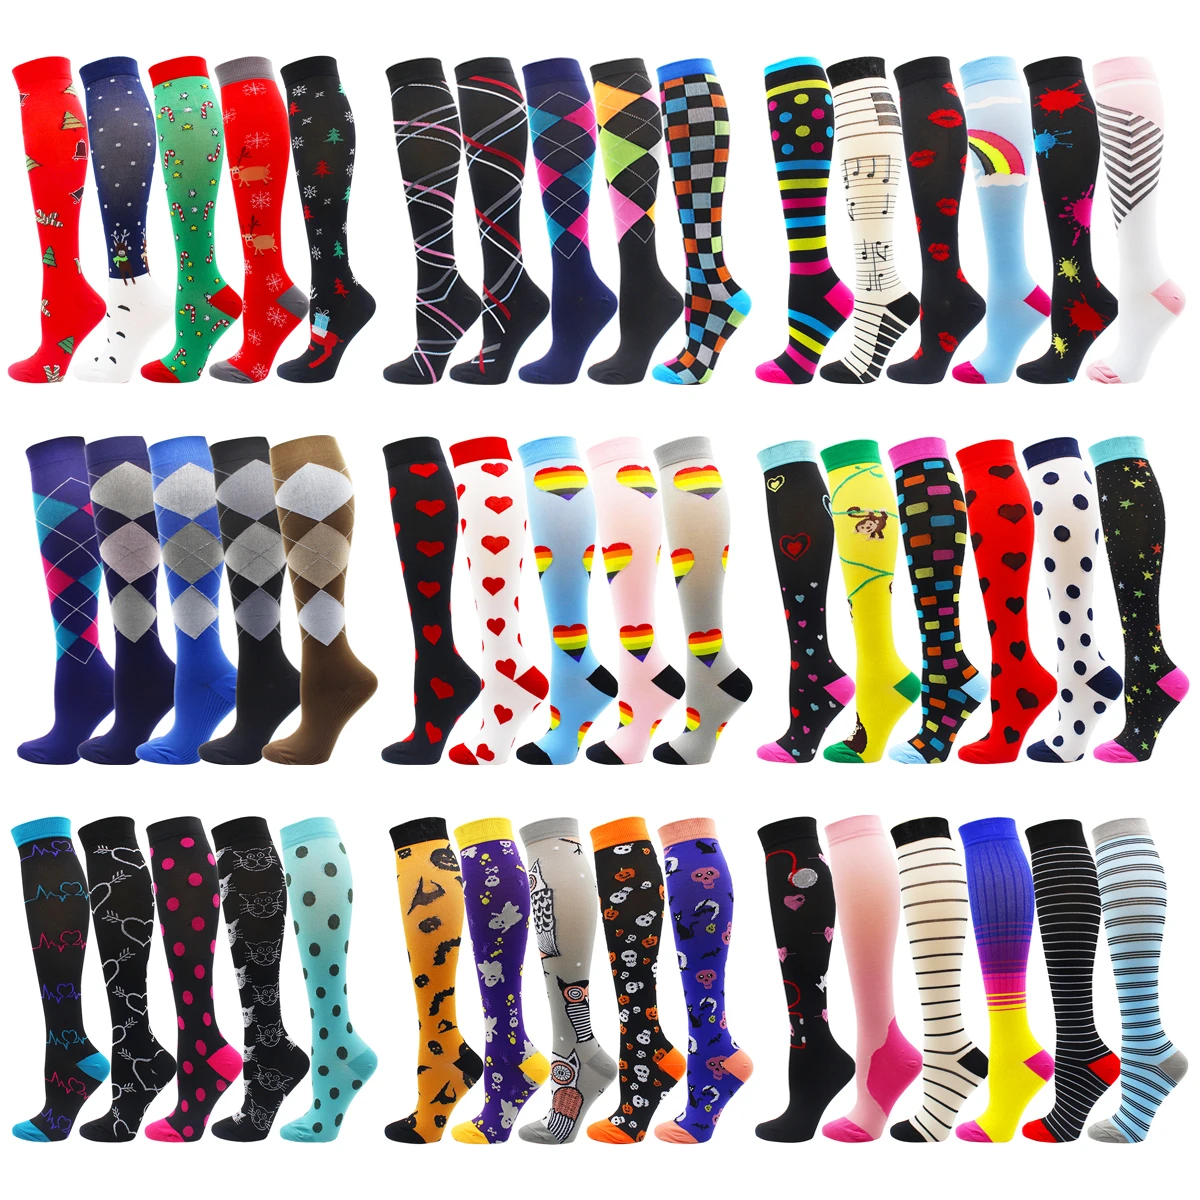 Woman and Men Compression Socks Circulation Multi Pairs Best Fit for Varicose Veins Athletic Travel Running Cycling Men Socks